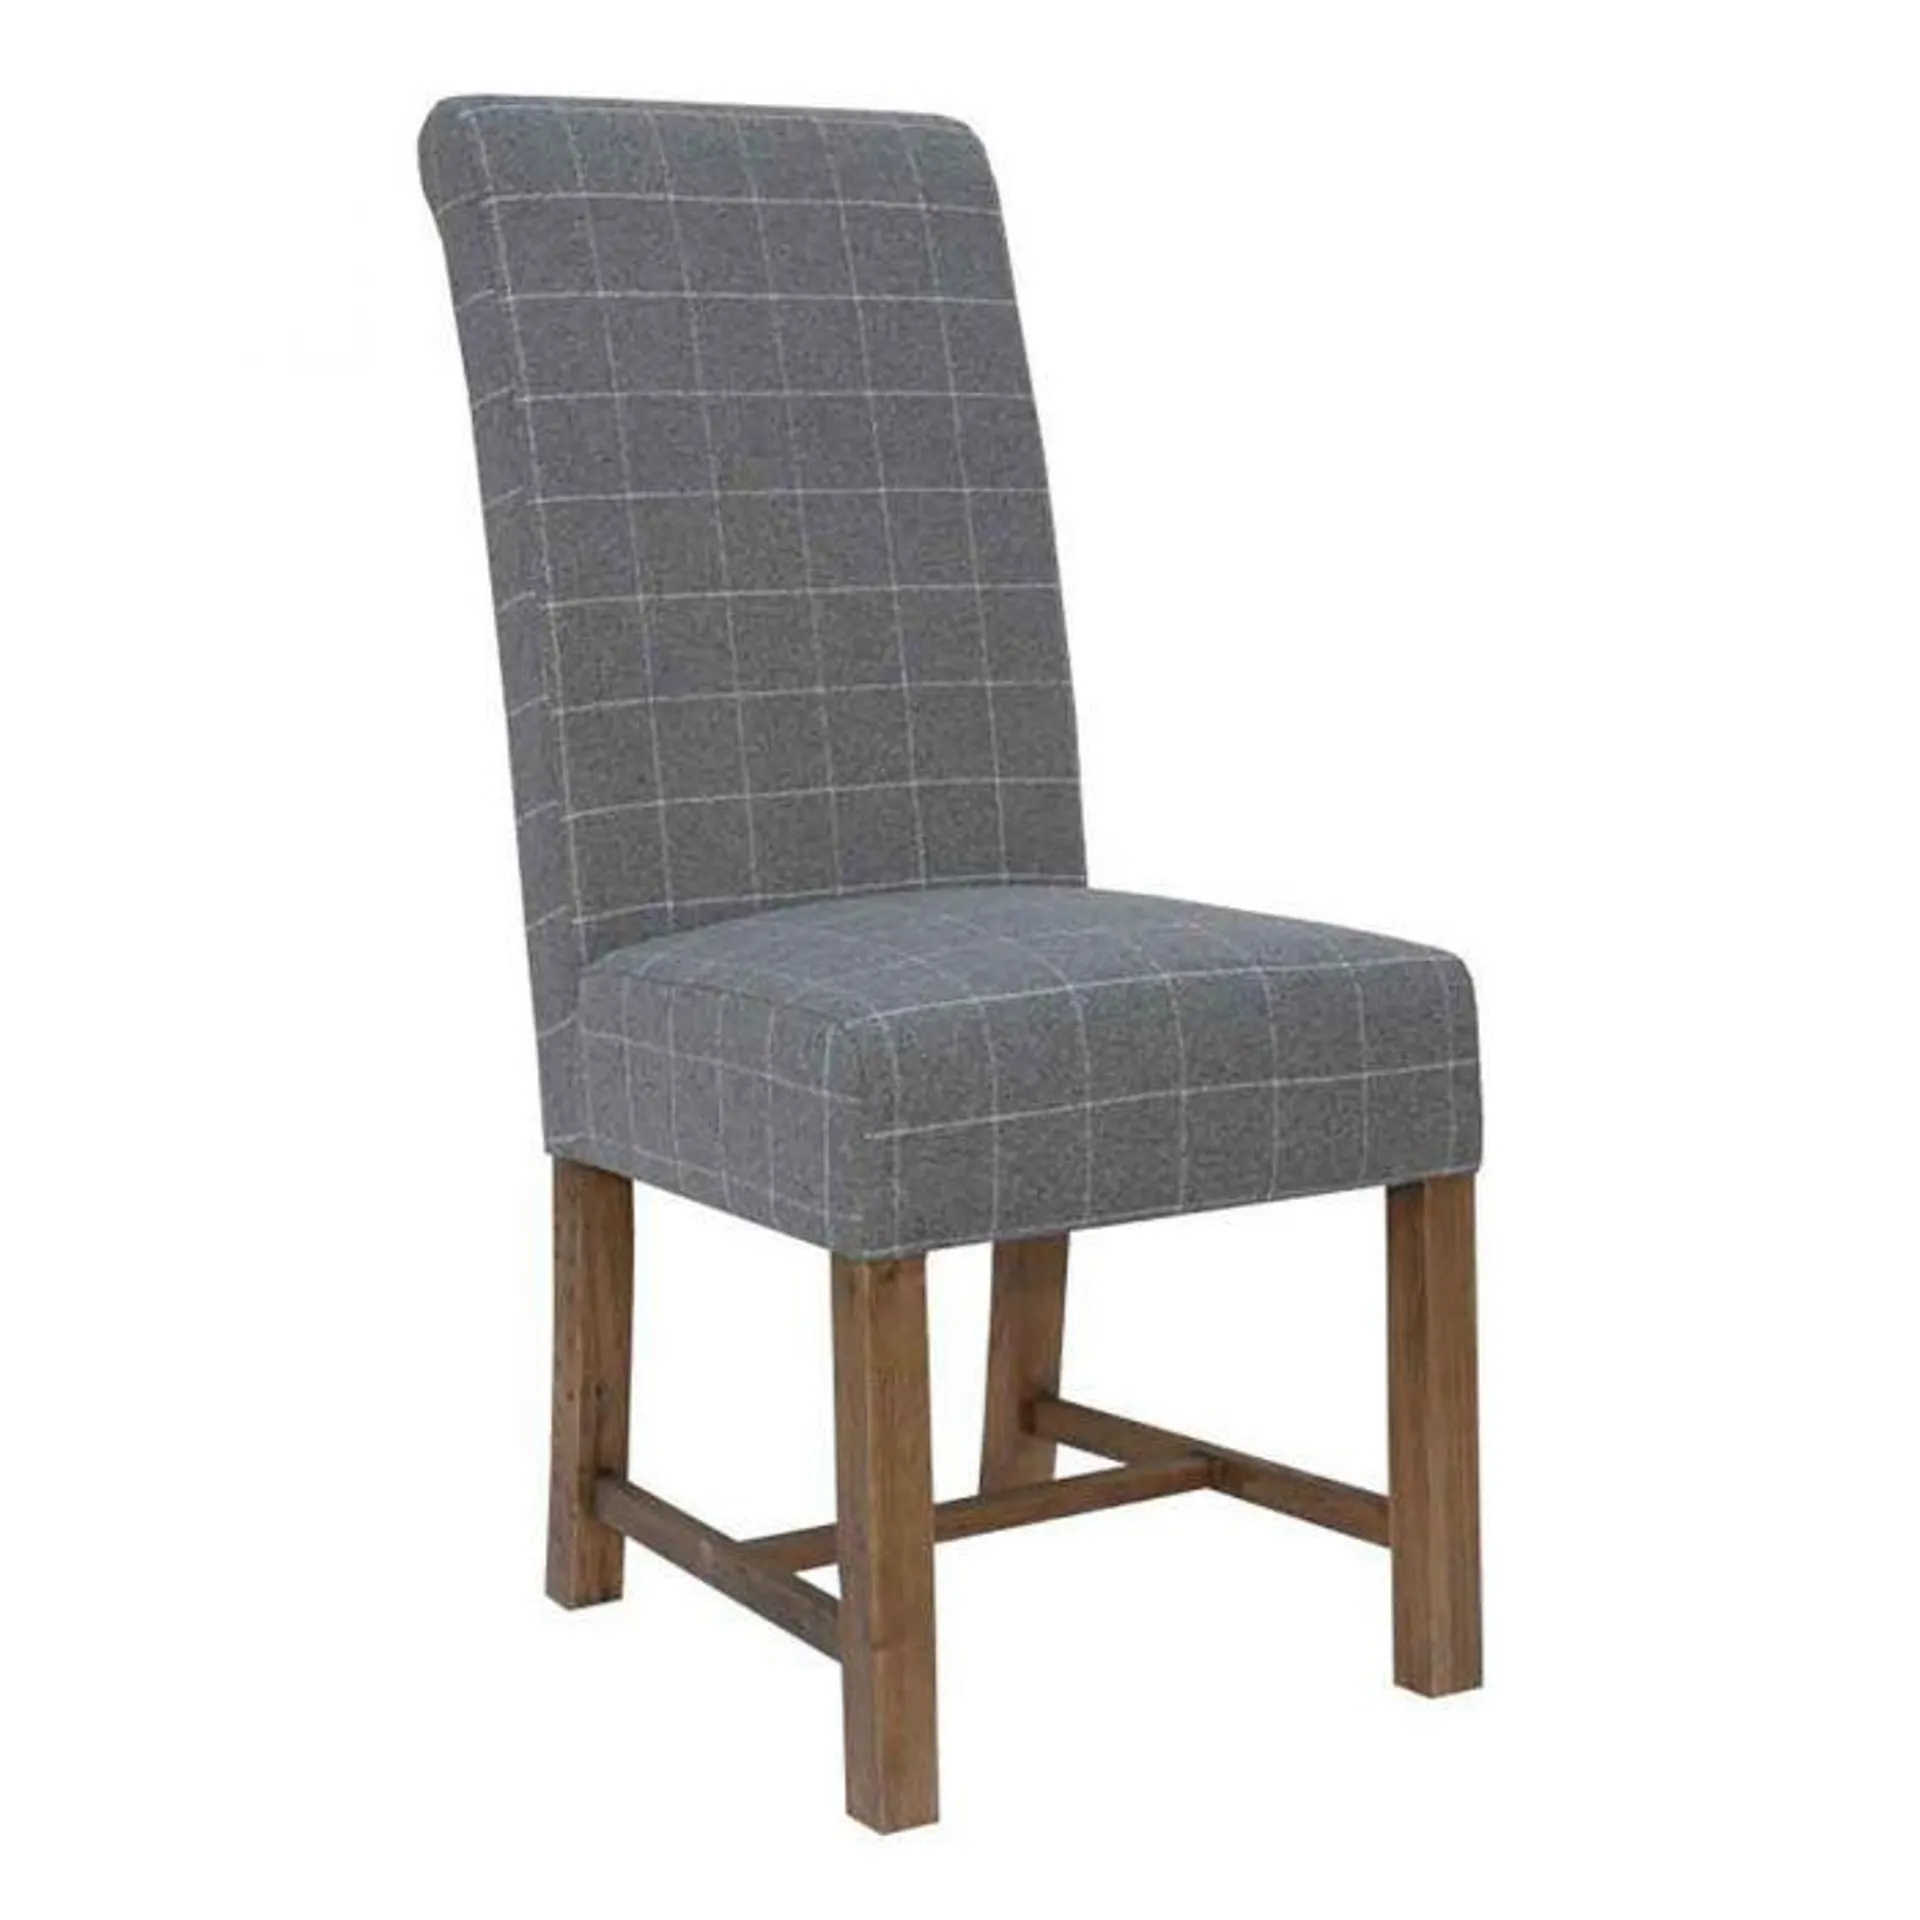 Heritage Grey Check High Back Dining Chair